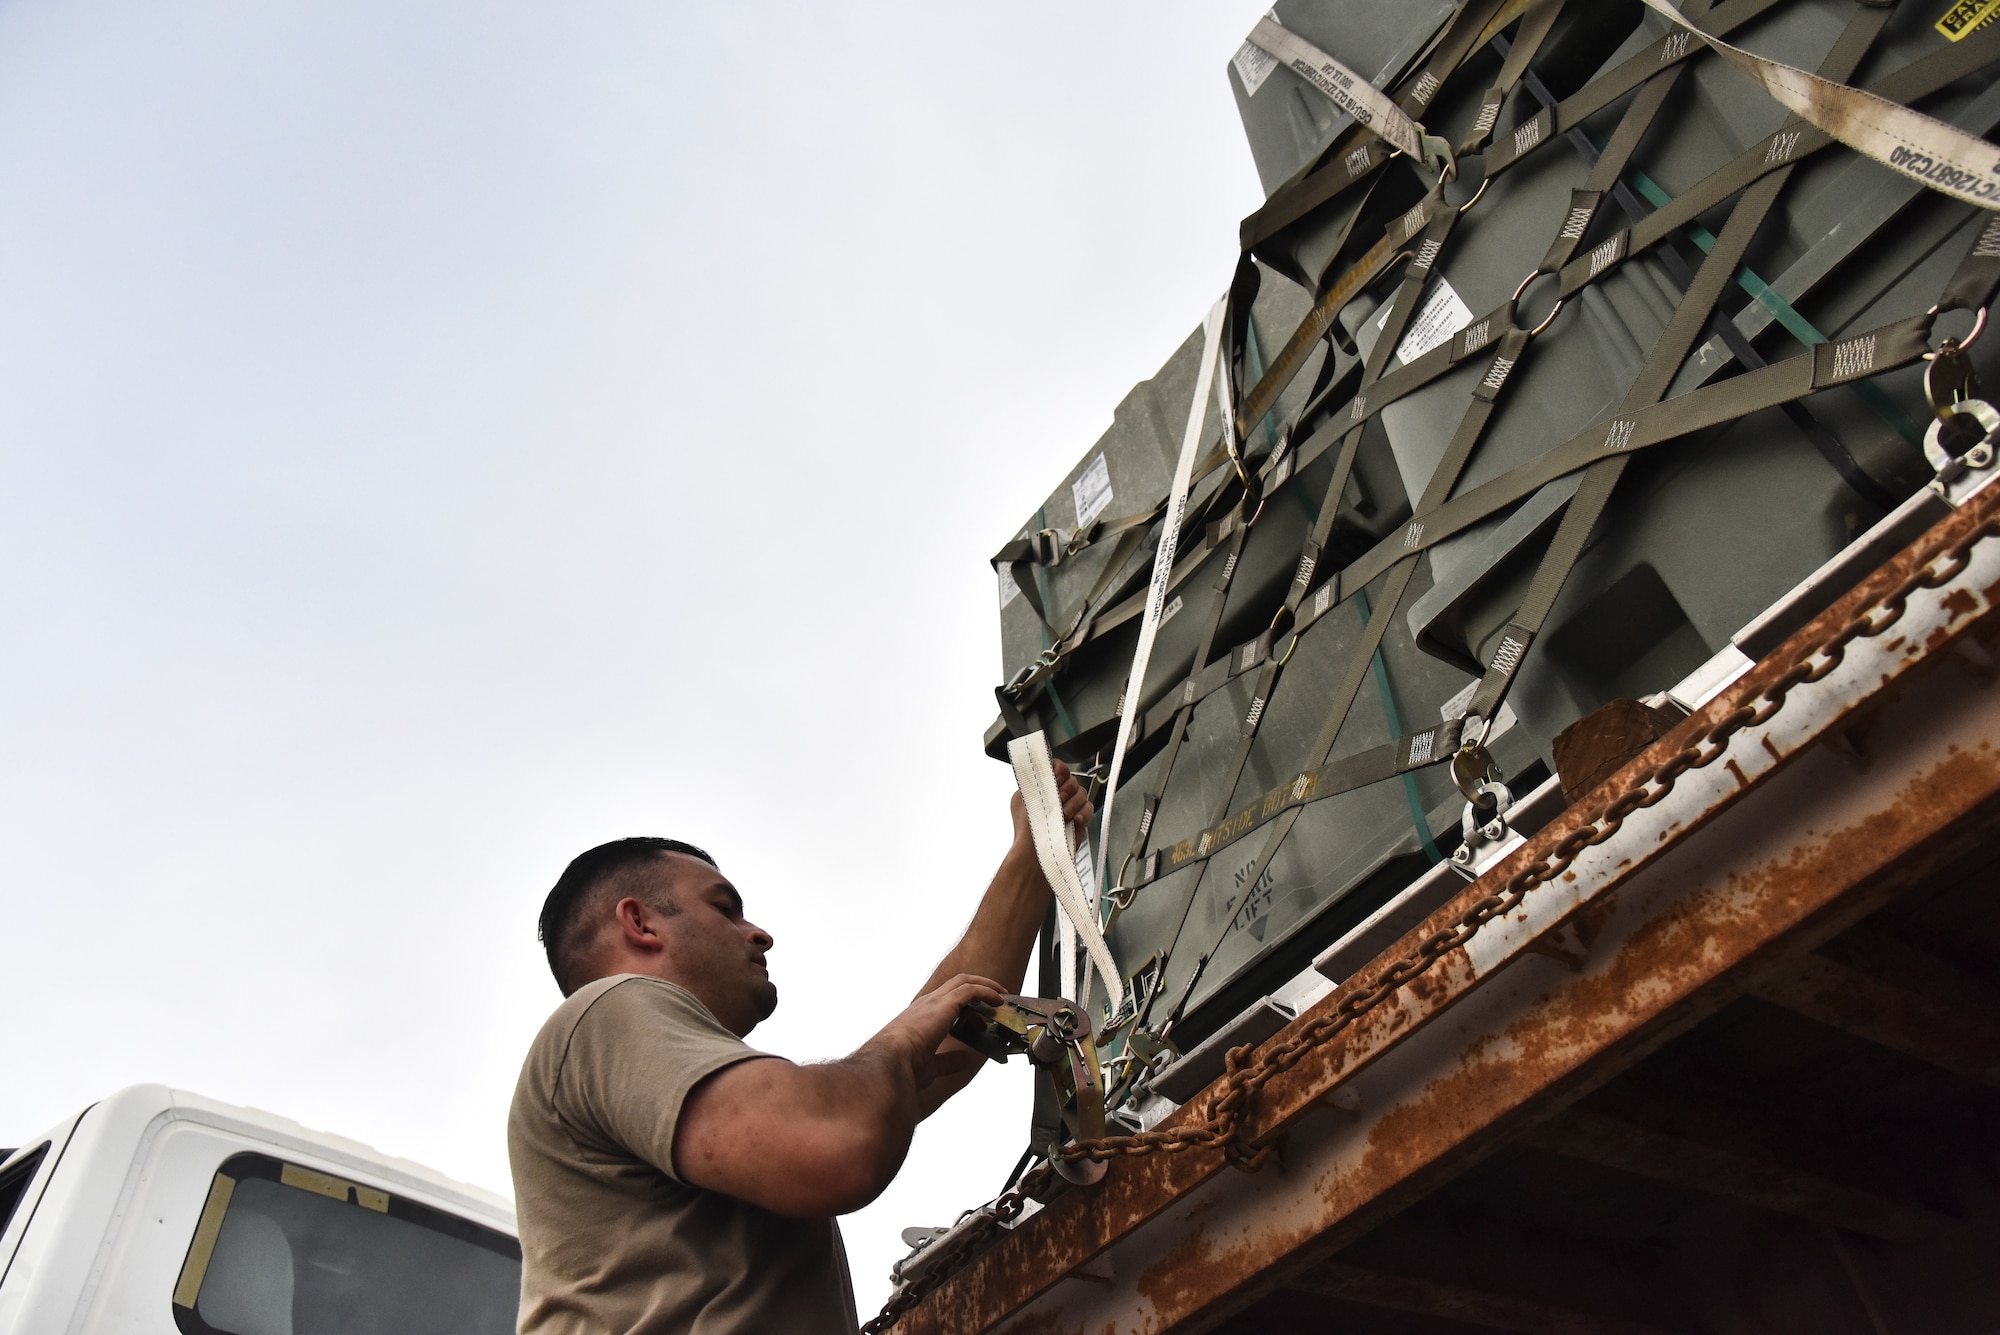 Tech. Sgt. Tyler Hawkins, 380th Expeditionary Maintenance Squadron munitions flight production section chief, secures the tie-down strap to a 40-foot trailer at Al Dhafra Air Base, United Arab Emirates, Feb. 15, 2019 Munitions Airmen receive, identify, inspect, store, recondition, ship, issue, deliver, maintain, test and assemble guided and unguided non-nuclear munitions. (U.S. Air Force photo by Senior Airman Mya M. Crosby)